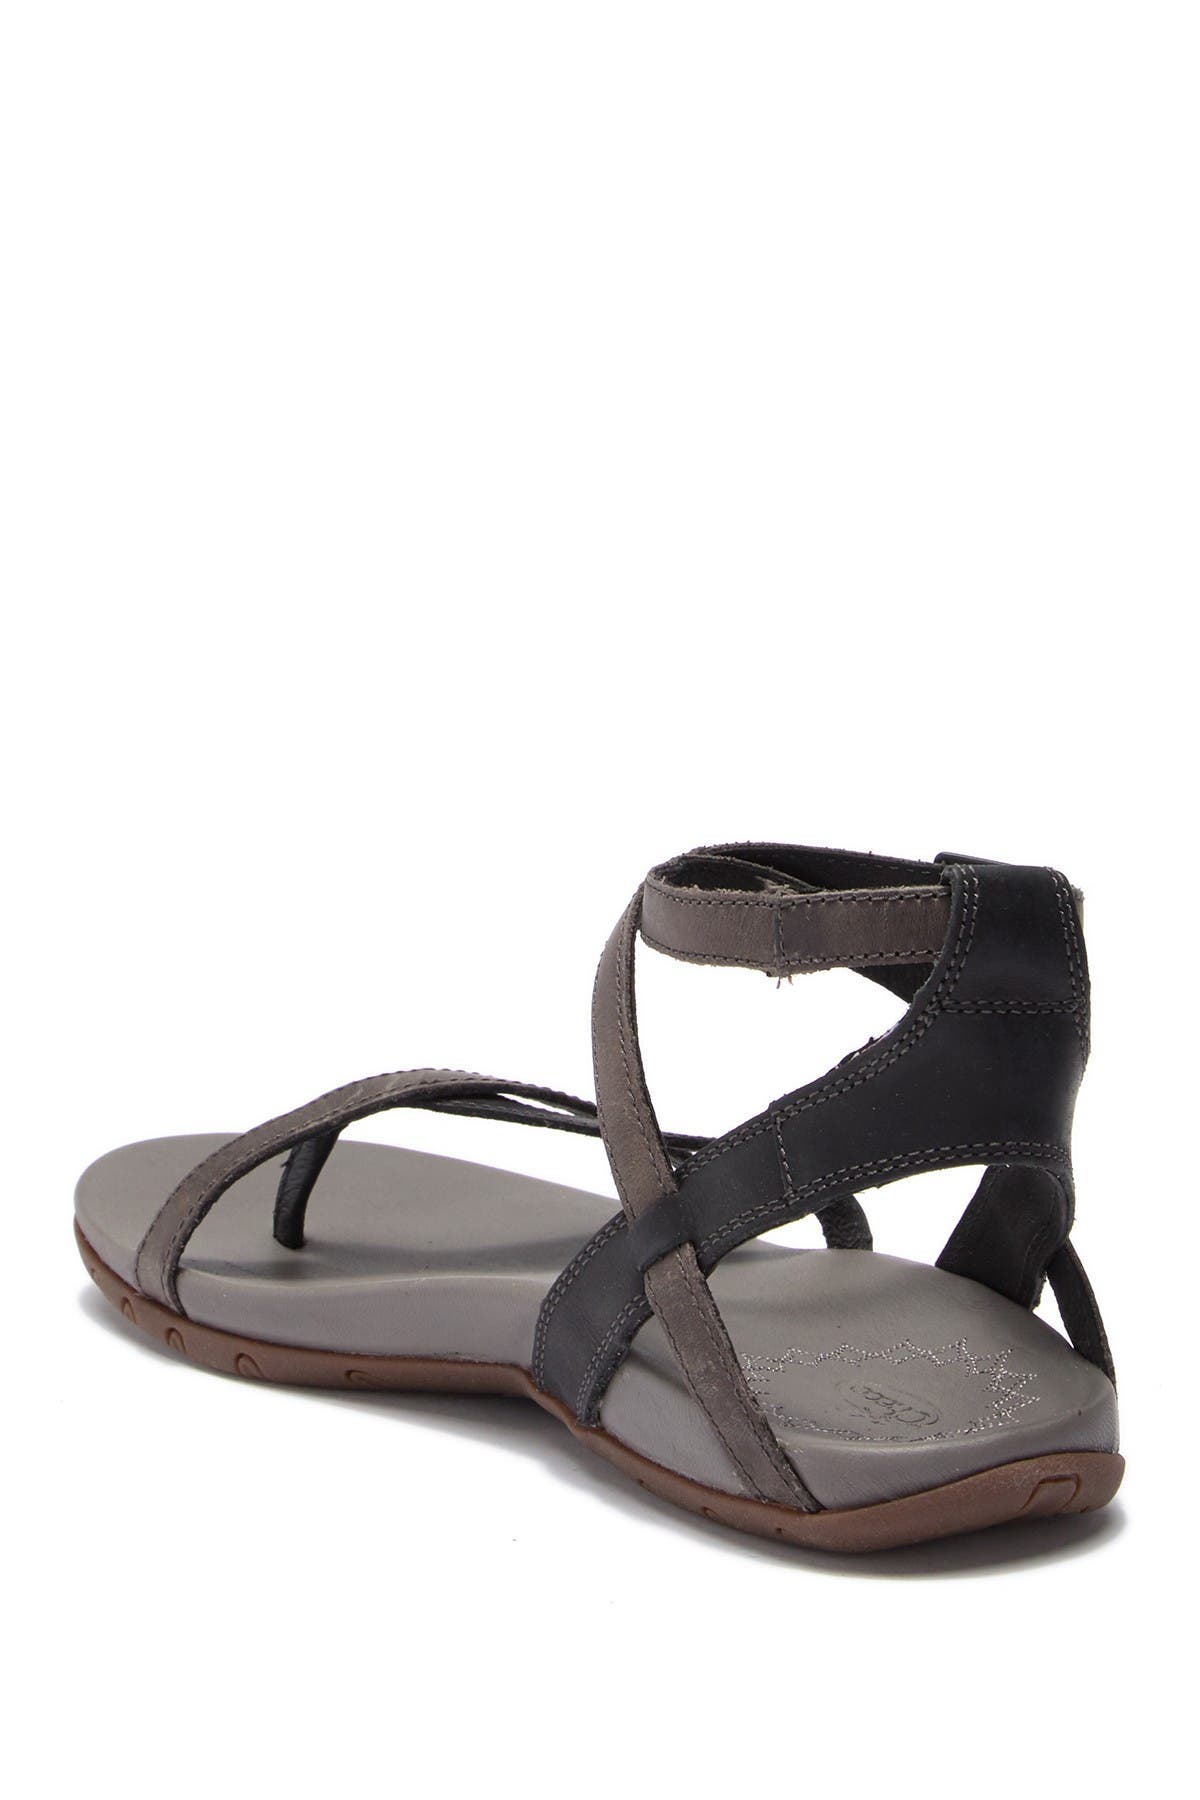 chaco juniper leather sandal